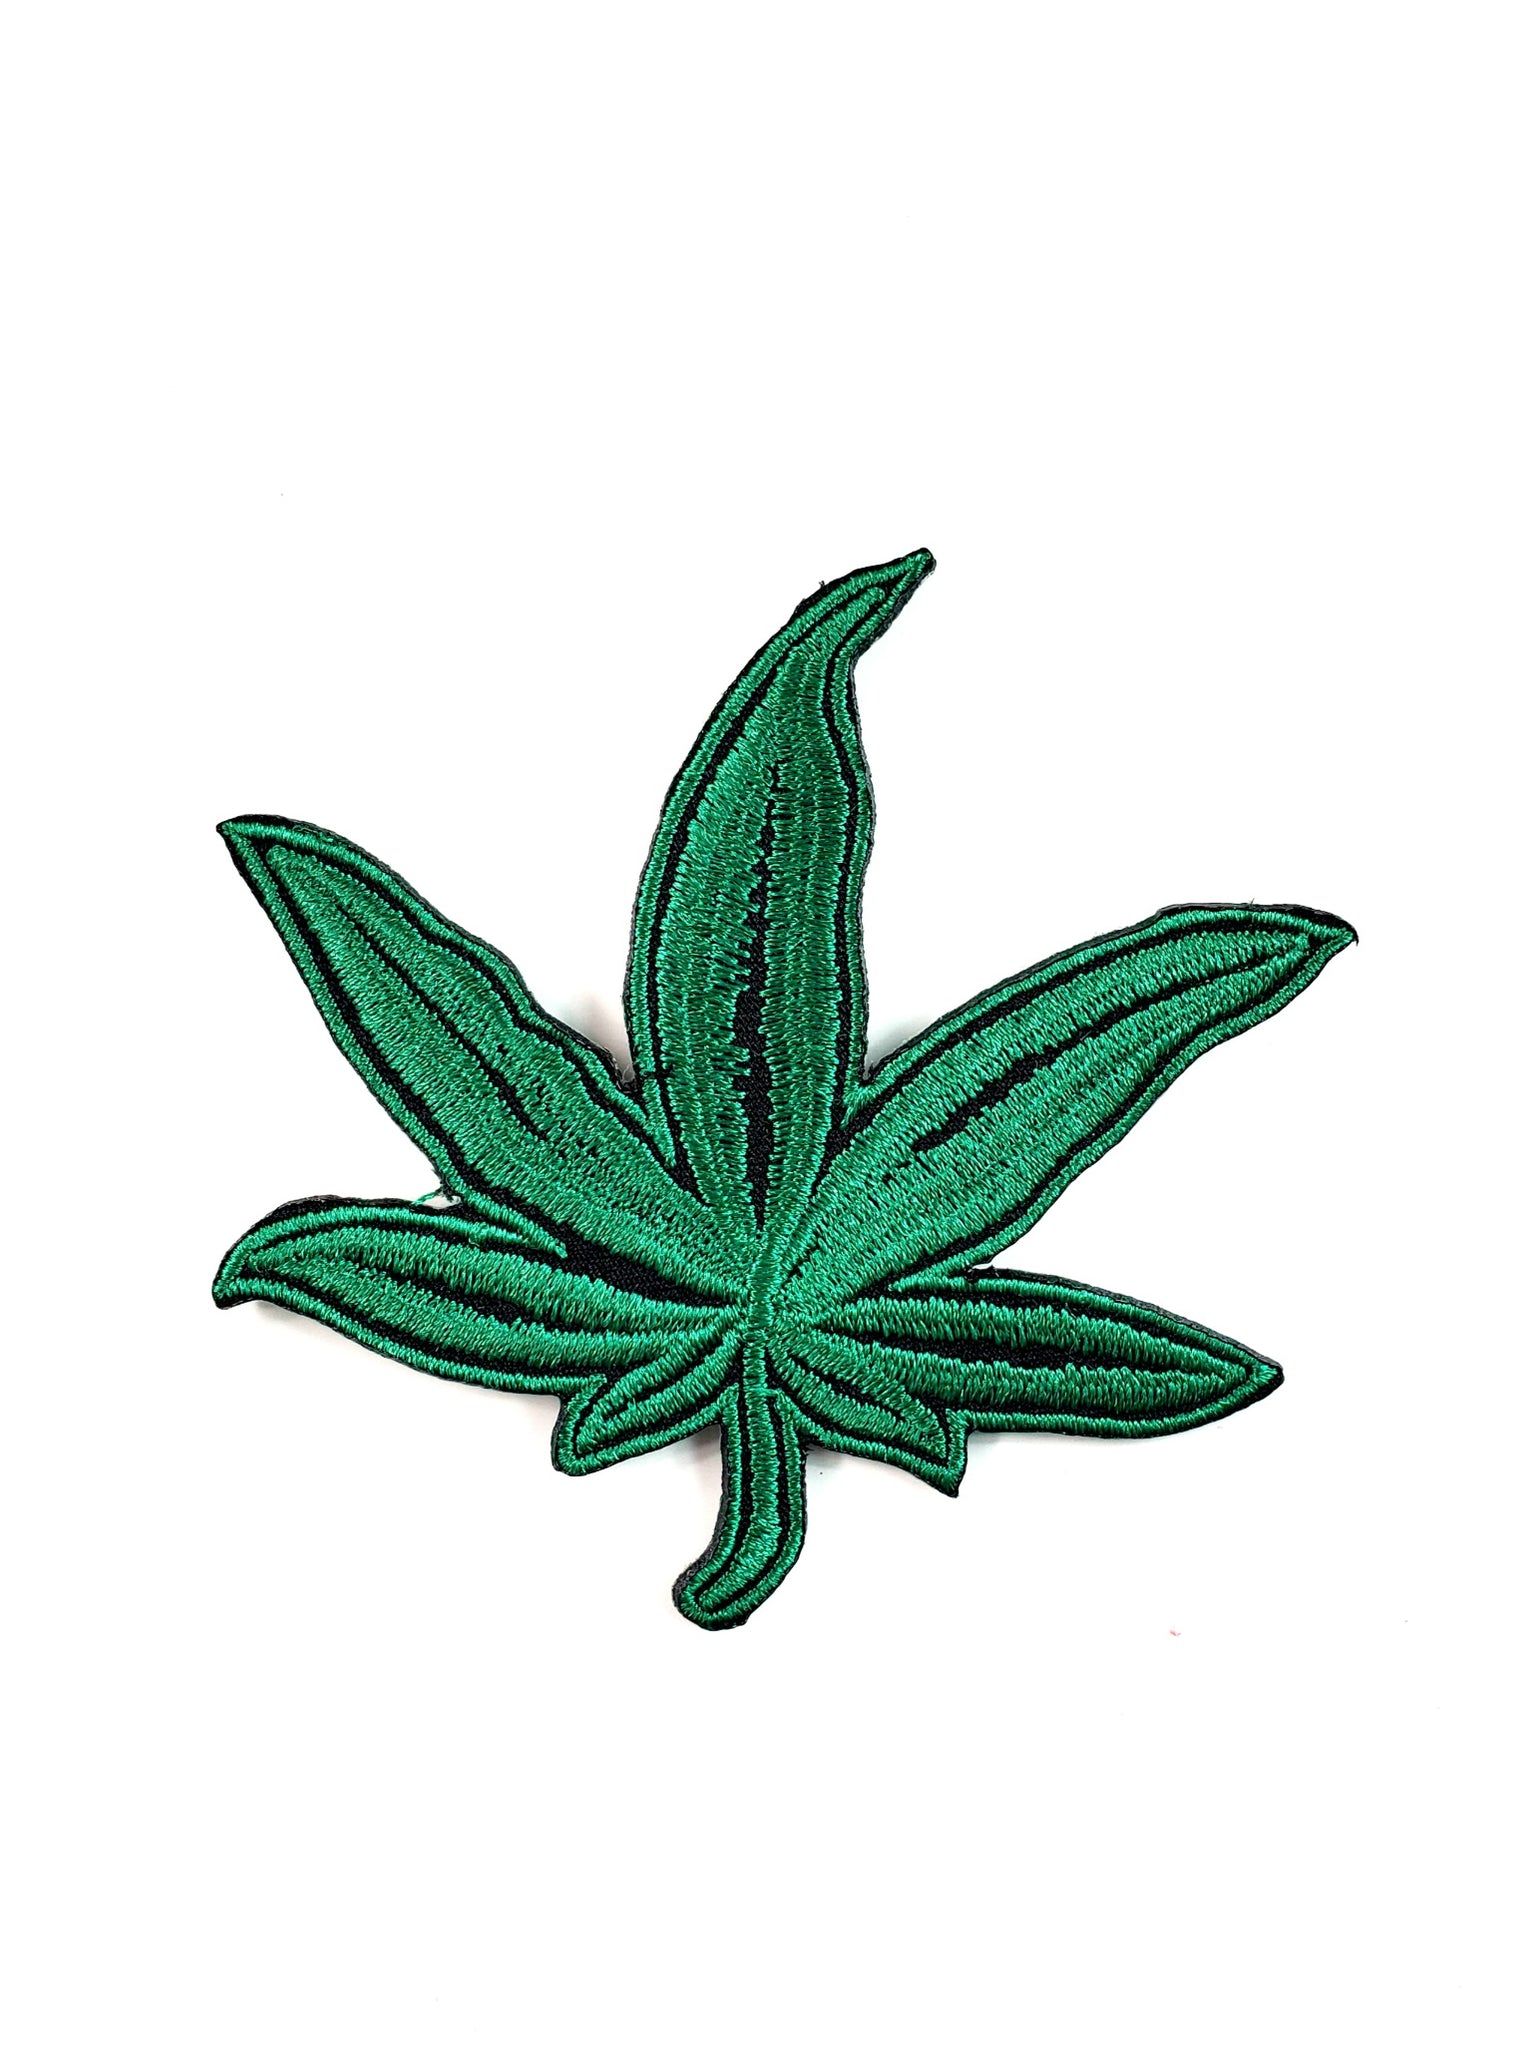 Embroidered 3 3/8" Marijuana Leaf Patch in green and black 